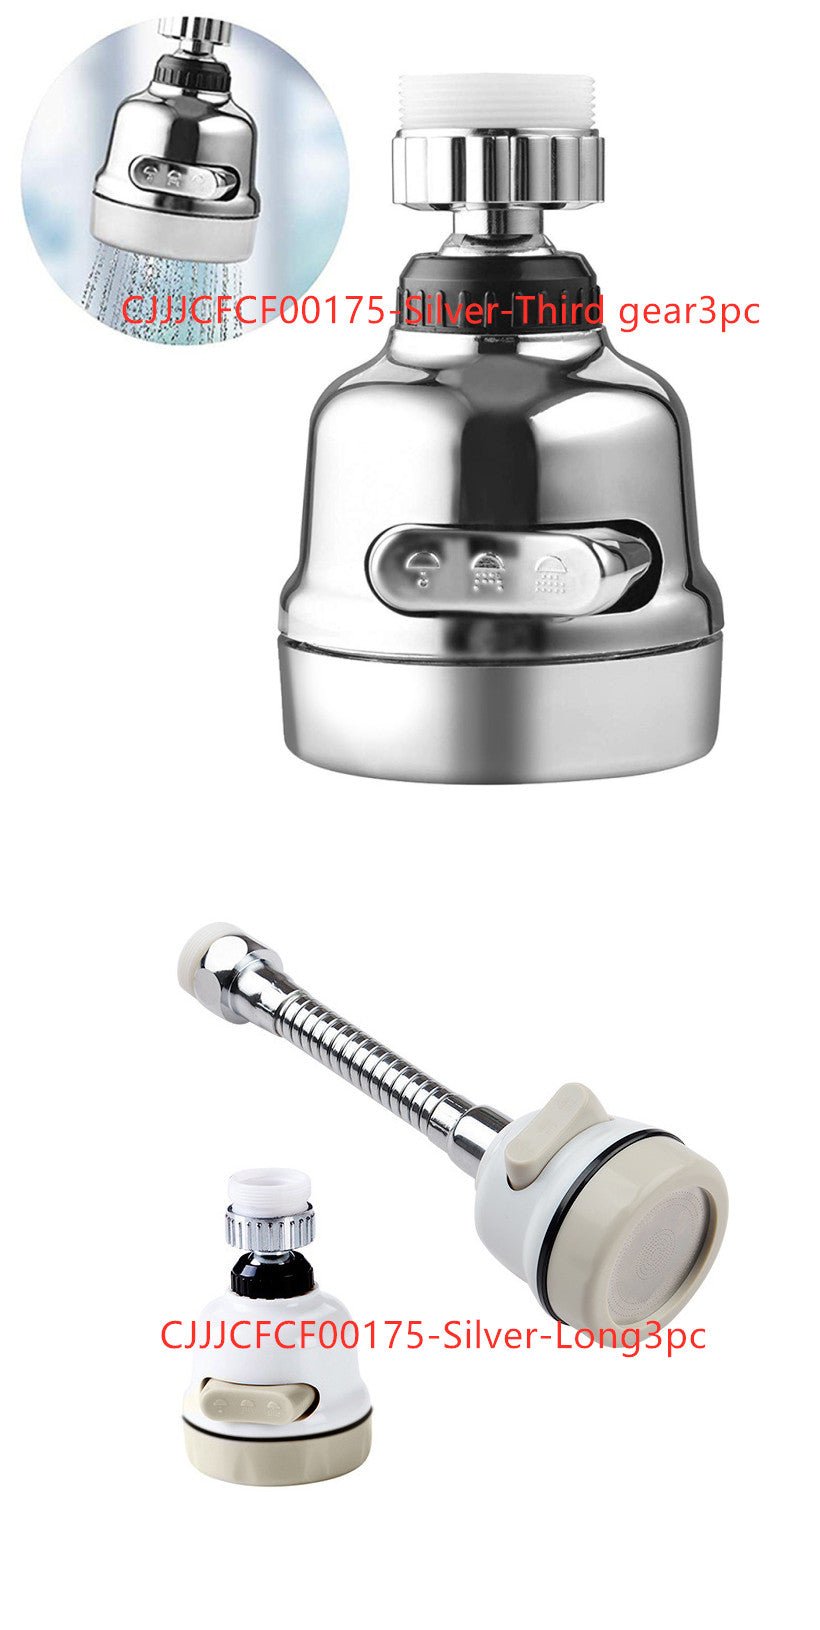 Faucet Booster Shower Household Tap Splash Filter - Faucet Accessories -  Trend Goods